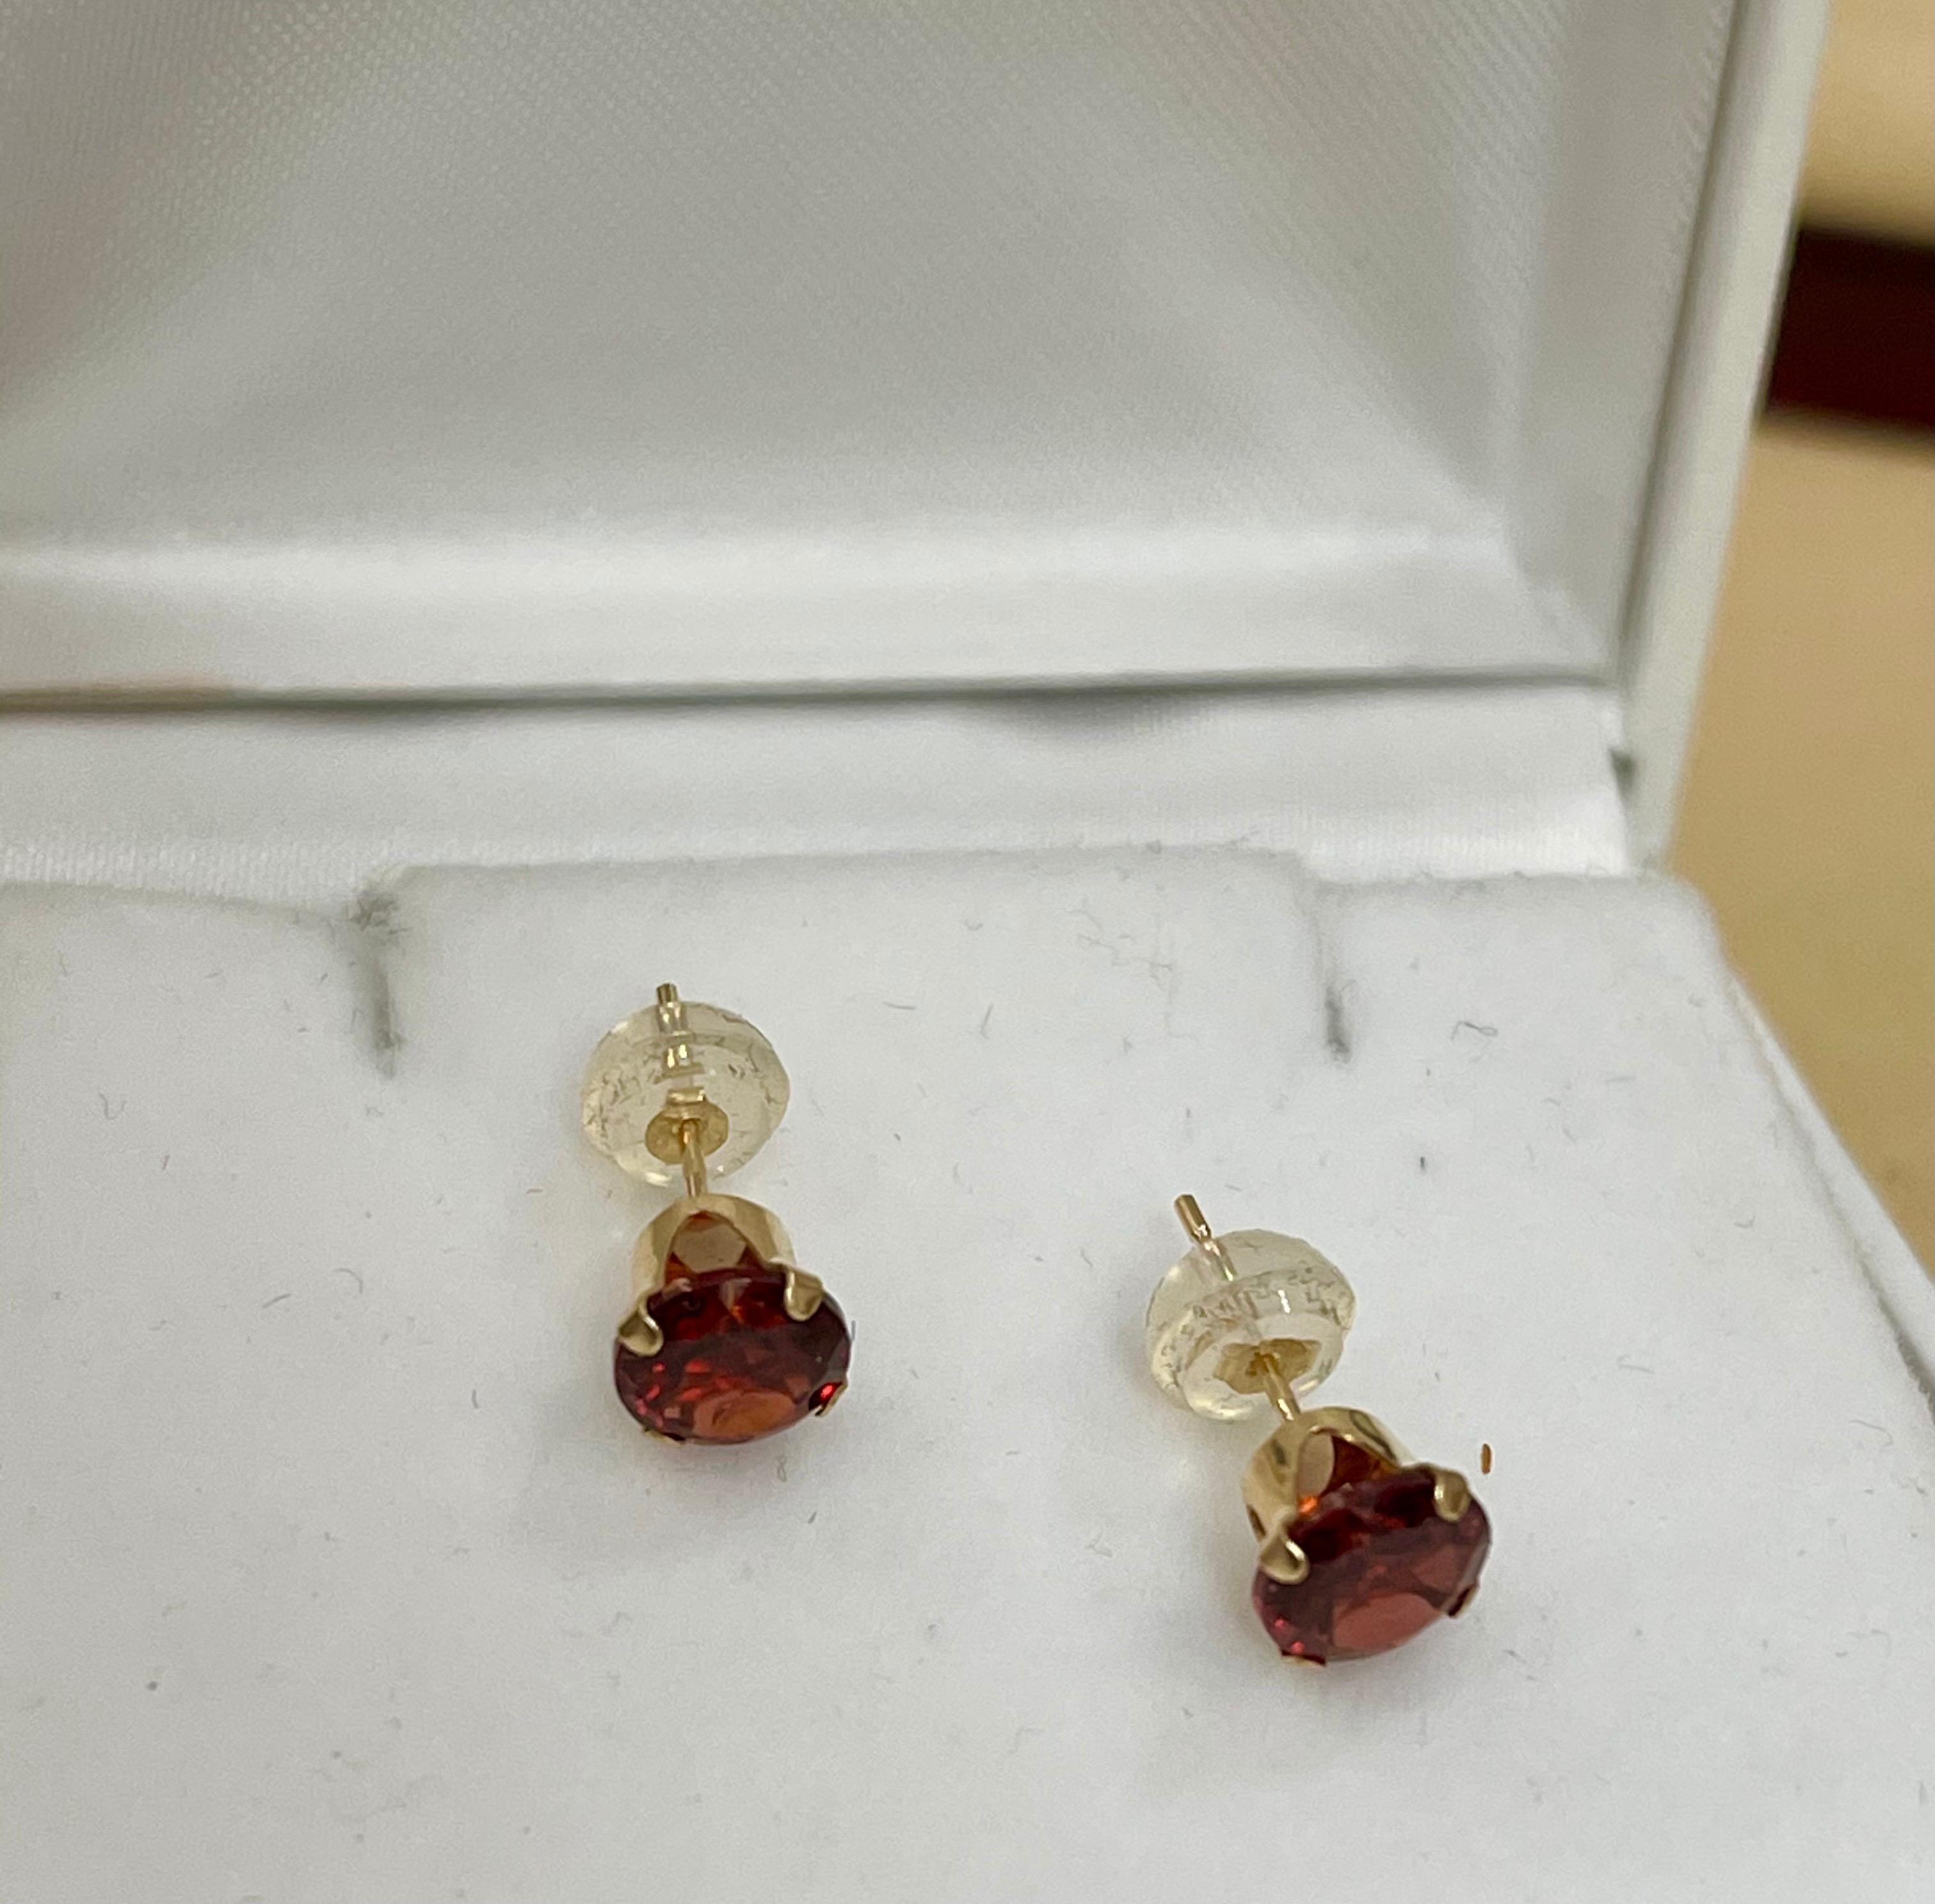 3.0 Carat Round Garnet Stud Post Earrings 14 Karat Yellow Gold In Excellent Condition For Sale In New York, NY